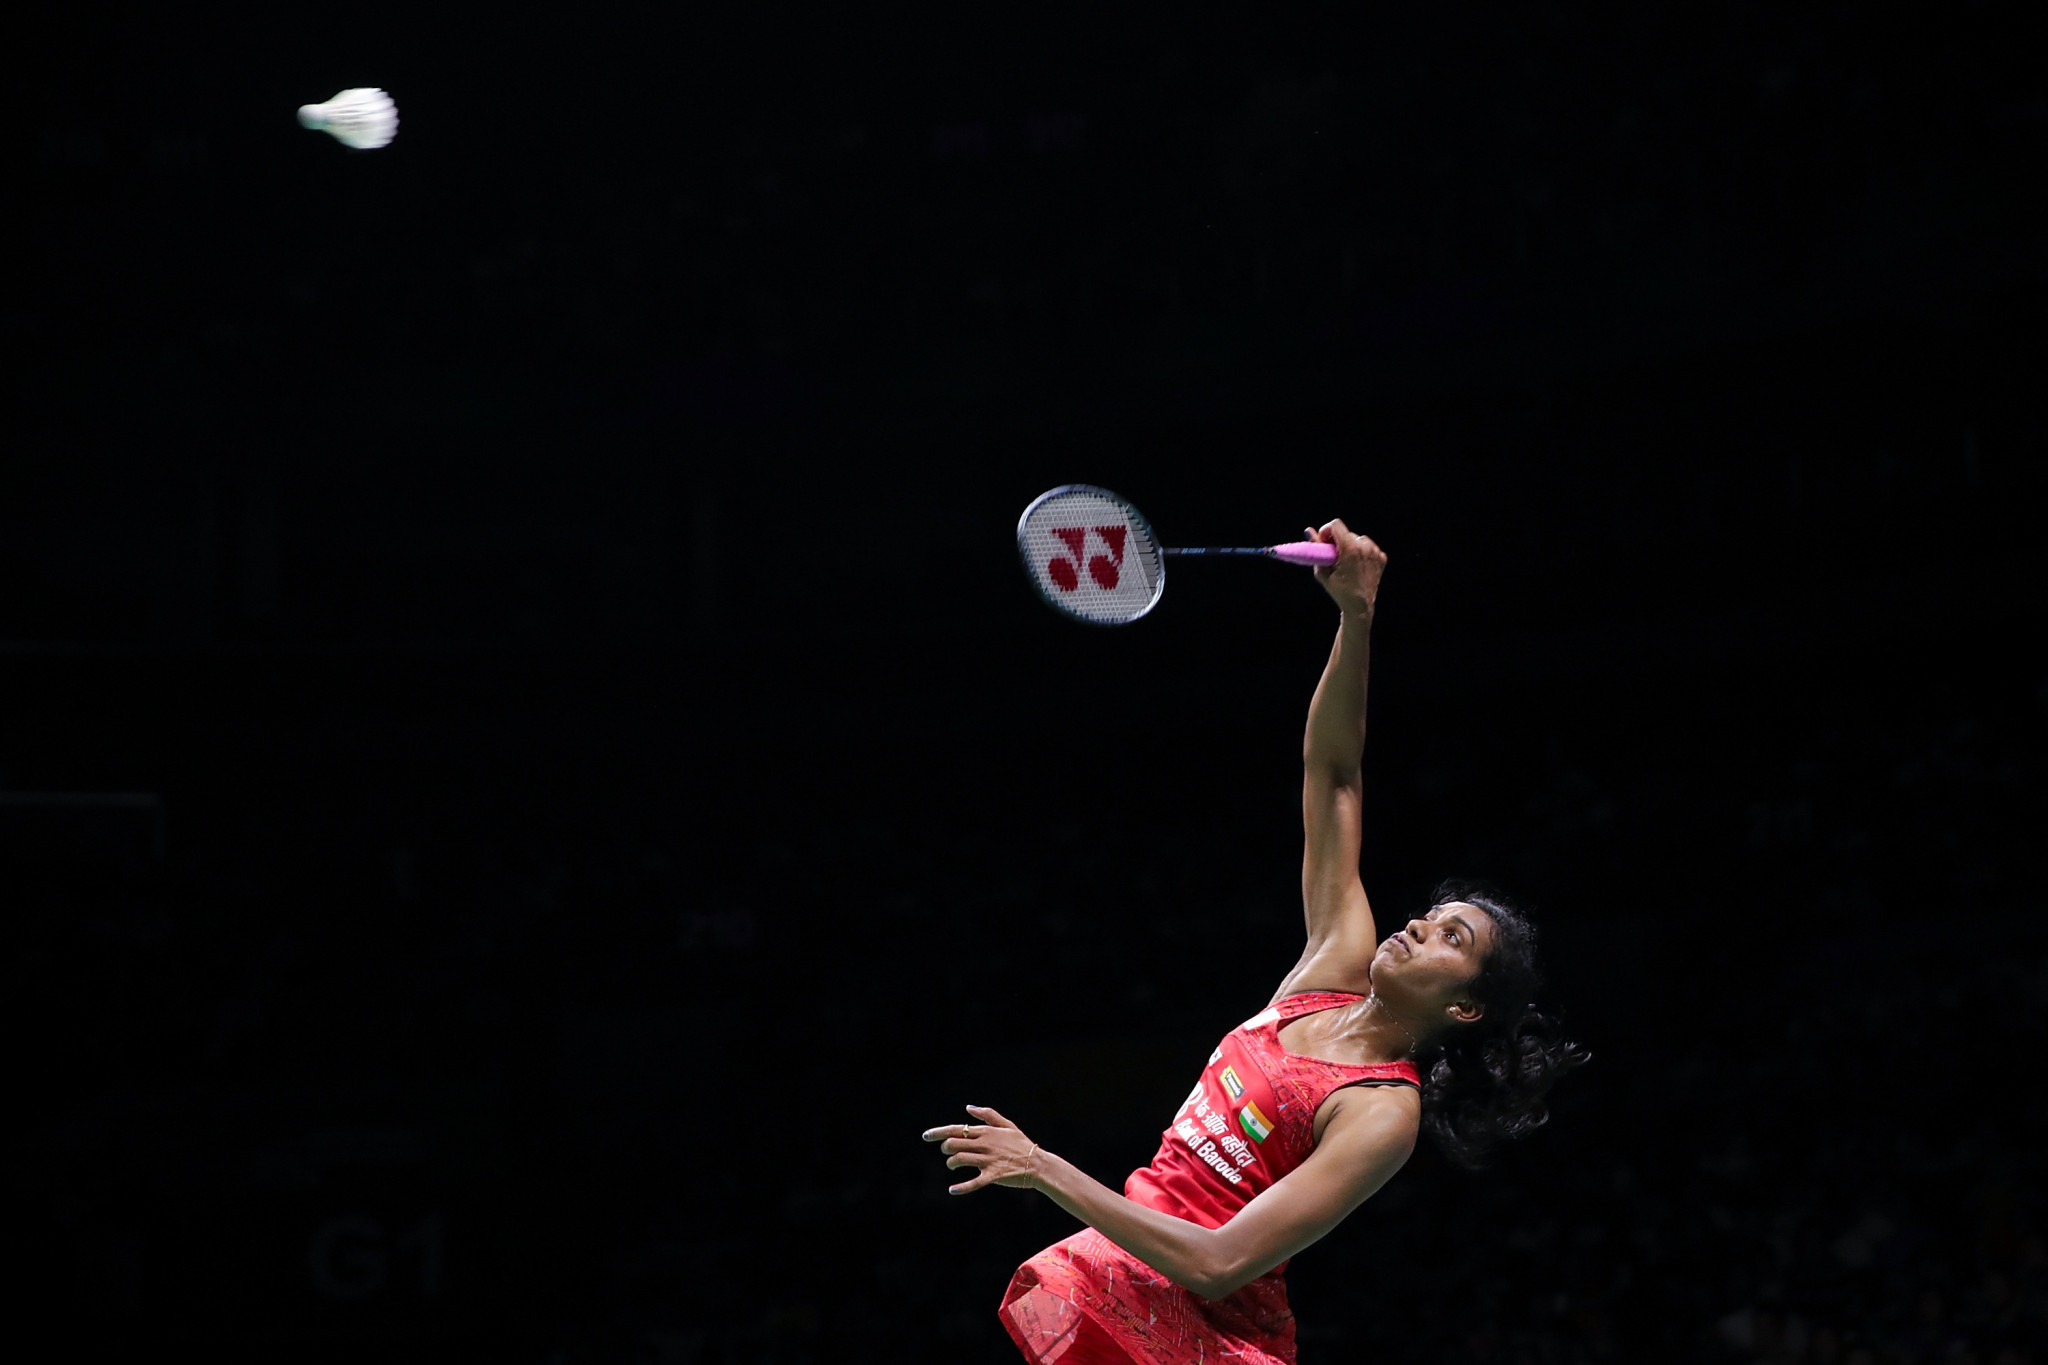 Chinese city Nanjing hosted this year's BWF World Championships ©Getty Images